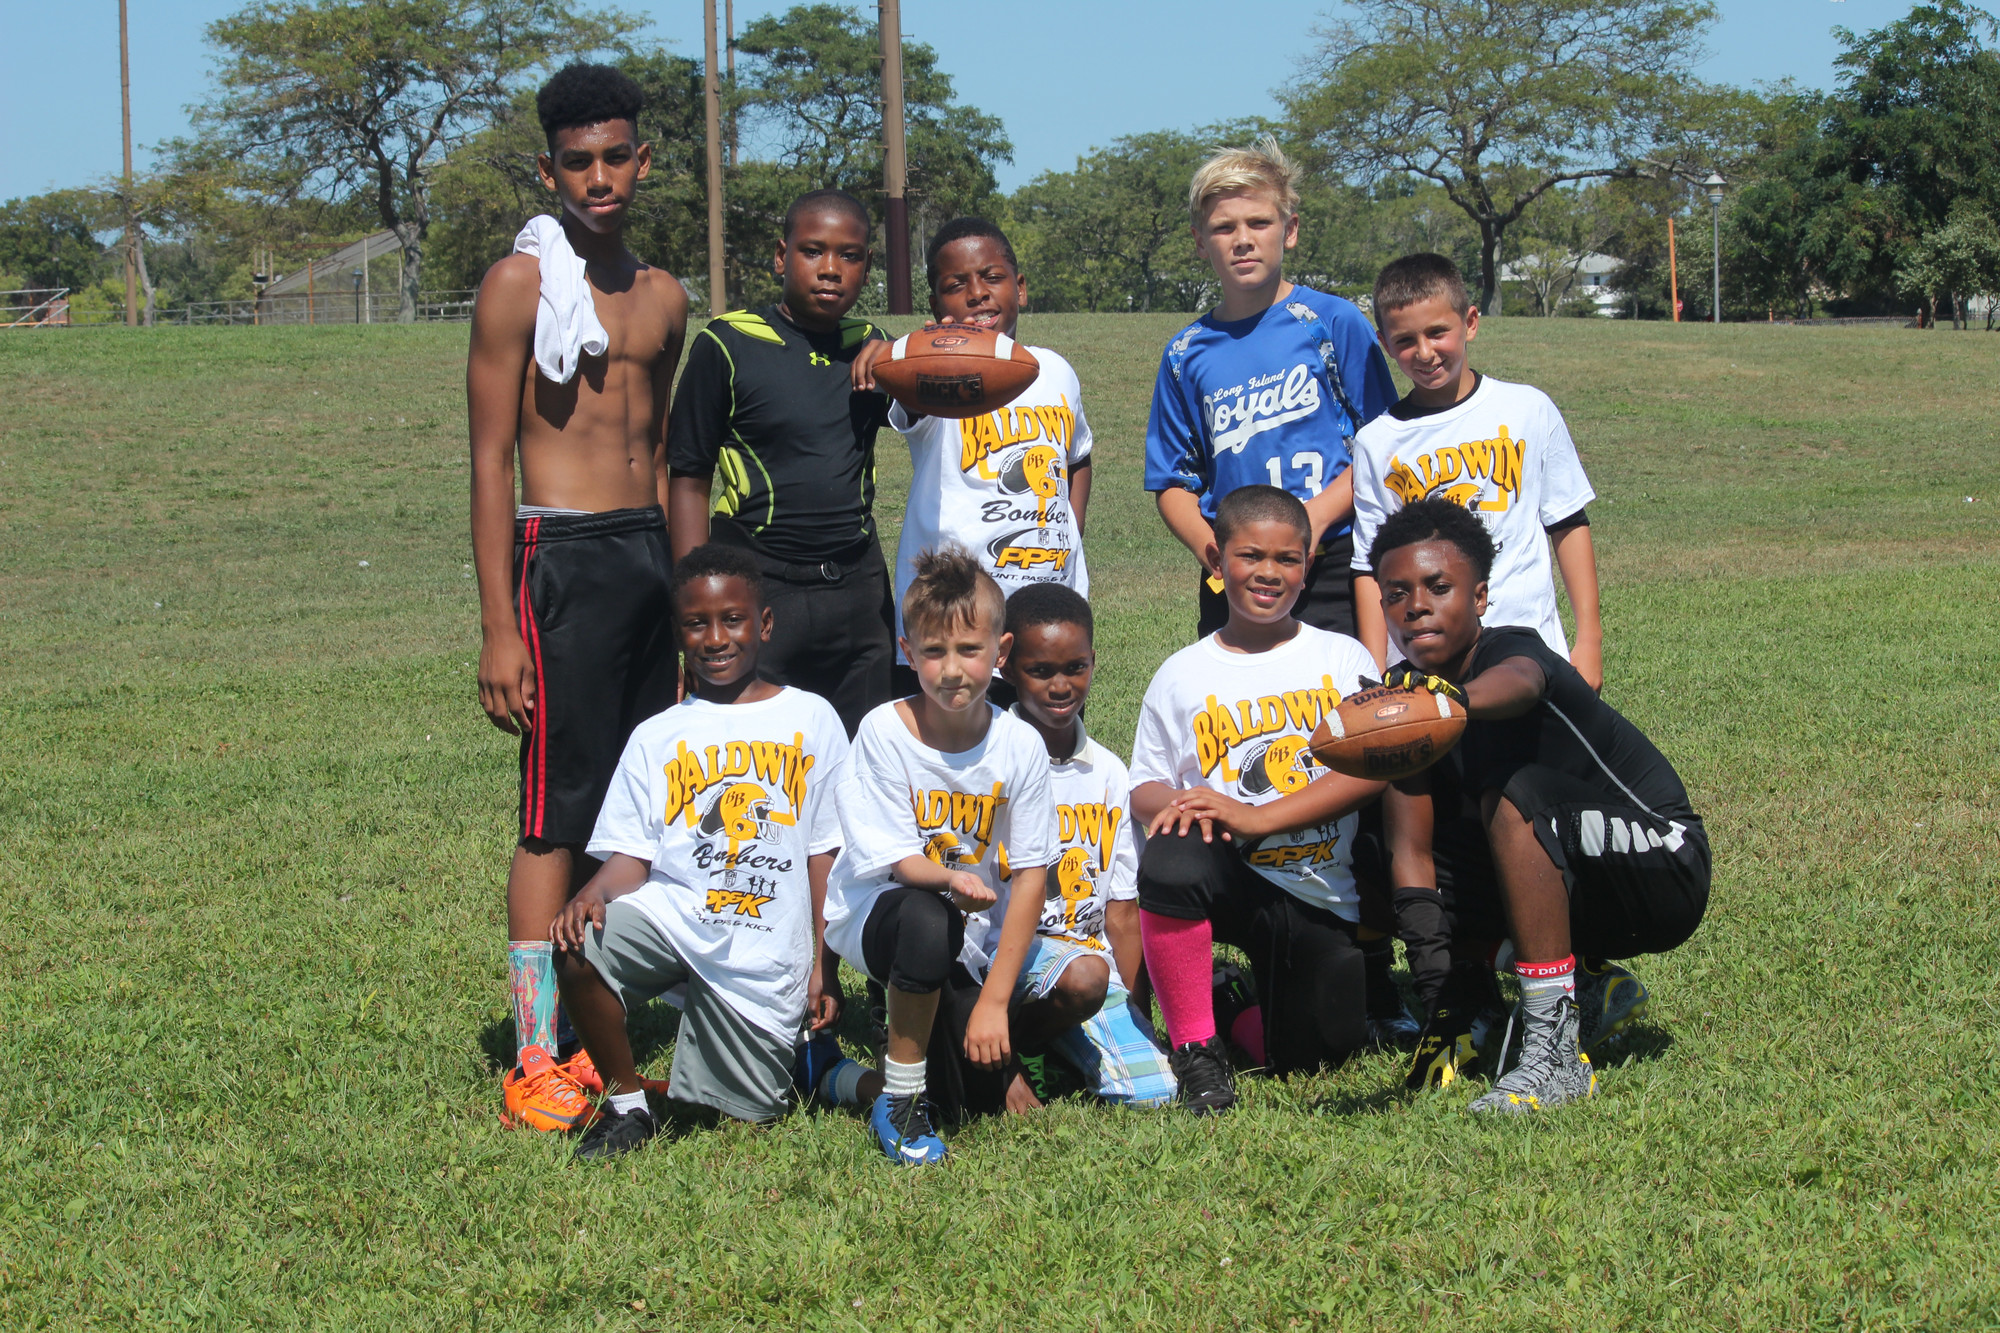 Kids of all ages came to Baldwin Park to participate in the Baldwin Bombers’ annual Punt, Pass and Kick competition.